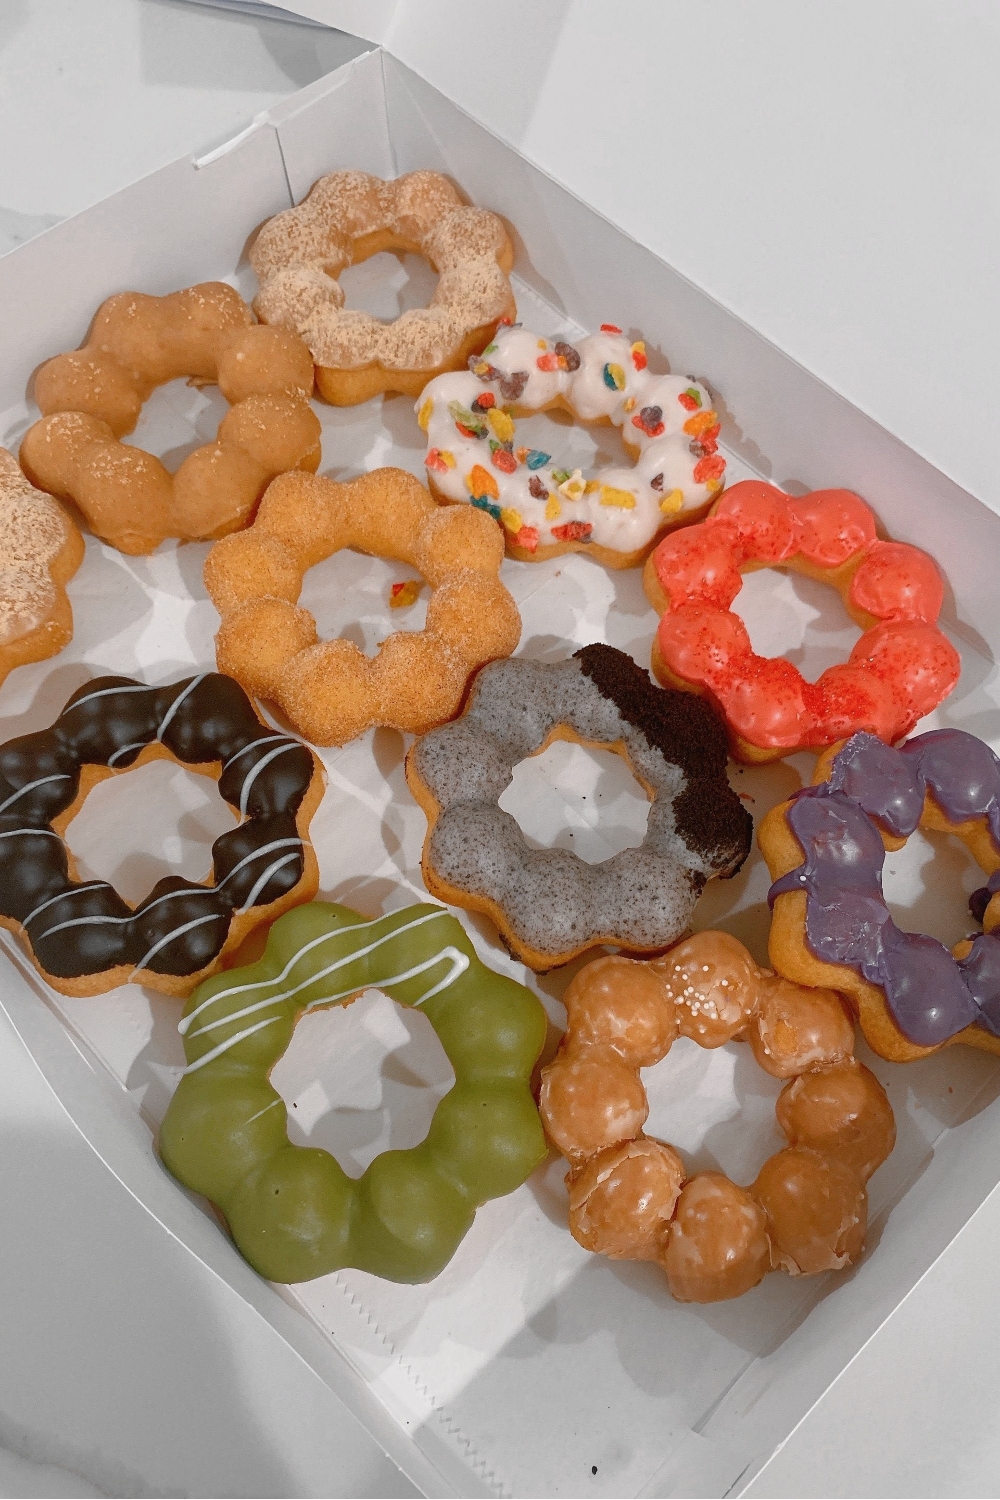 mochi donuts with glaze in a box